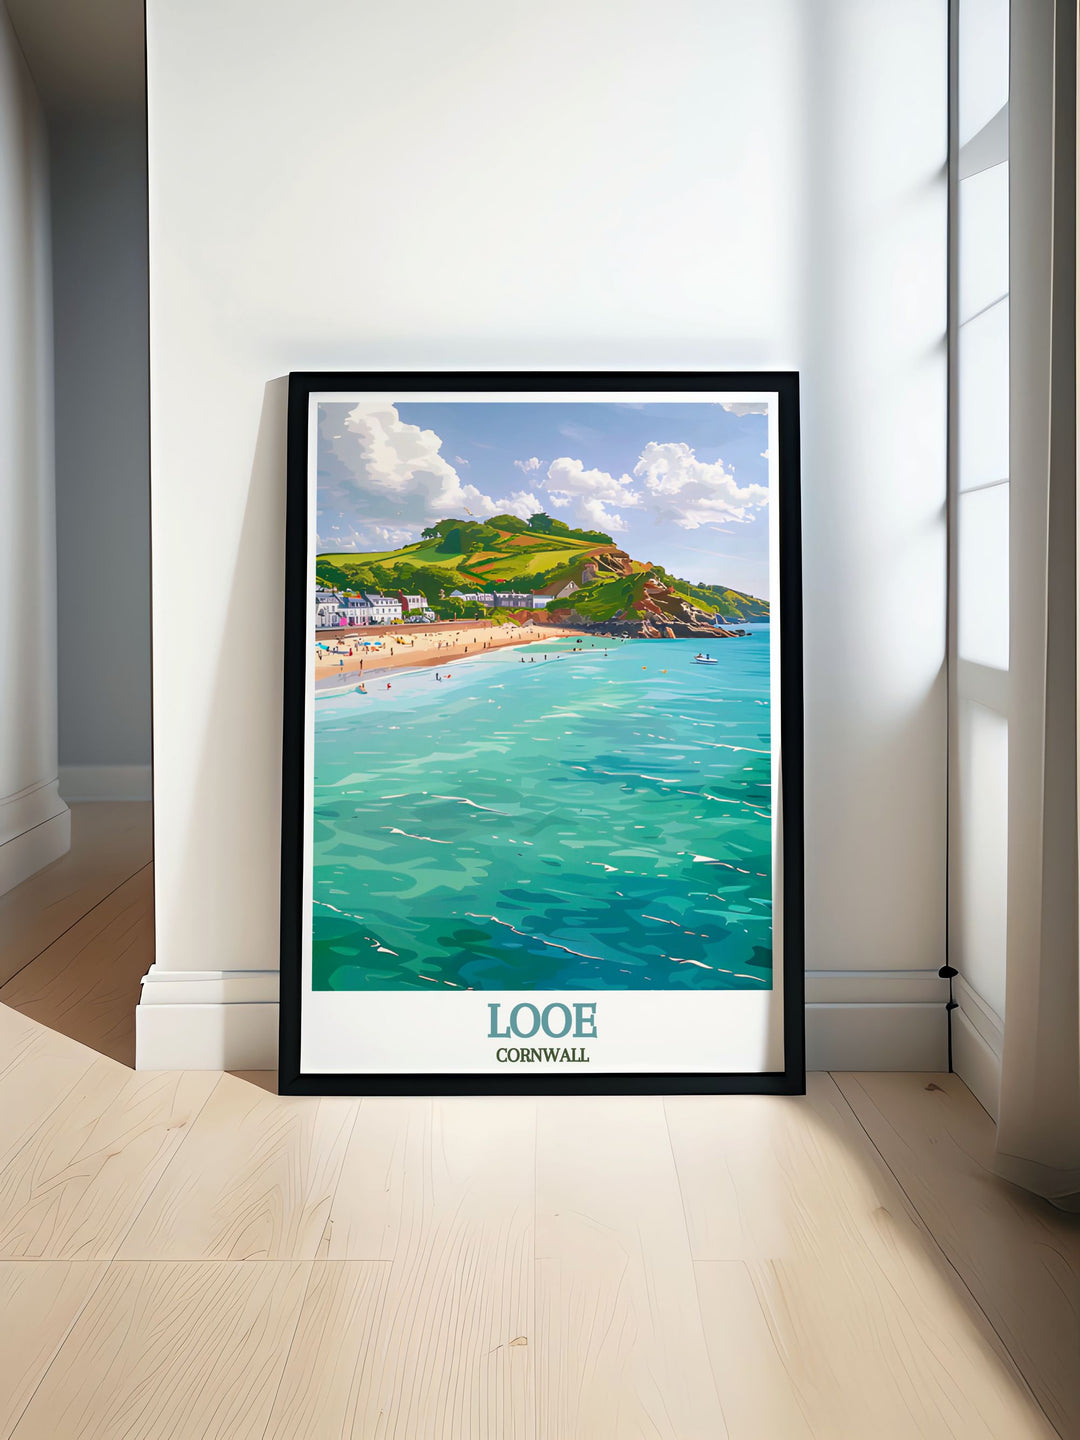 East Looe Beach travel print showing the serene coastline of Looe Cornwall perfect for adding a touch of tranquility to your home decor and making it an ideal gift for Looe enthusiasts and lovers of Cornwall wall decor and artwork.